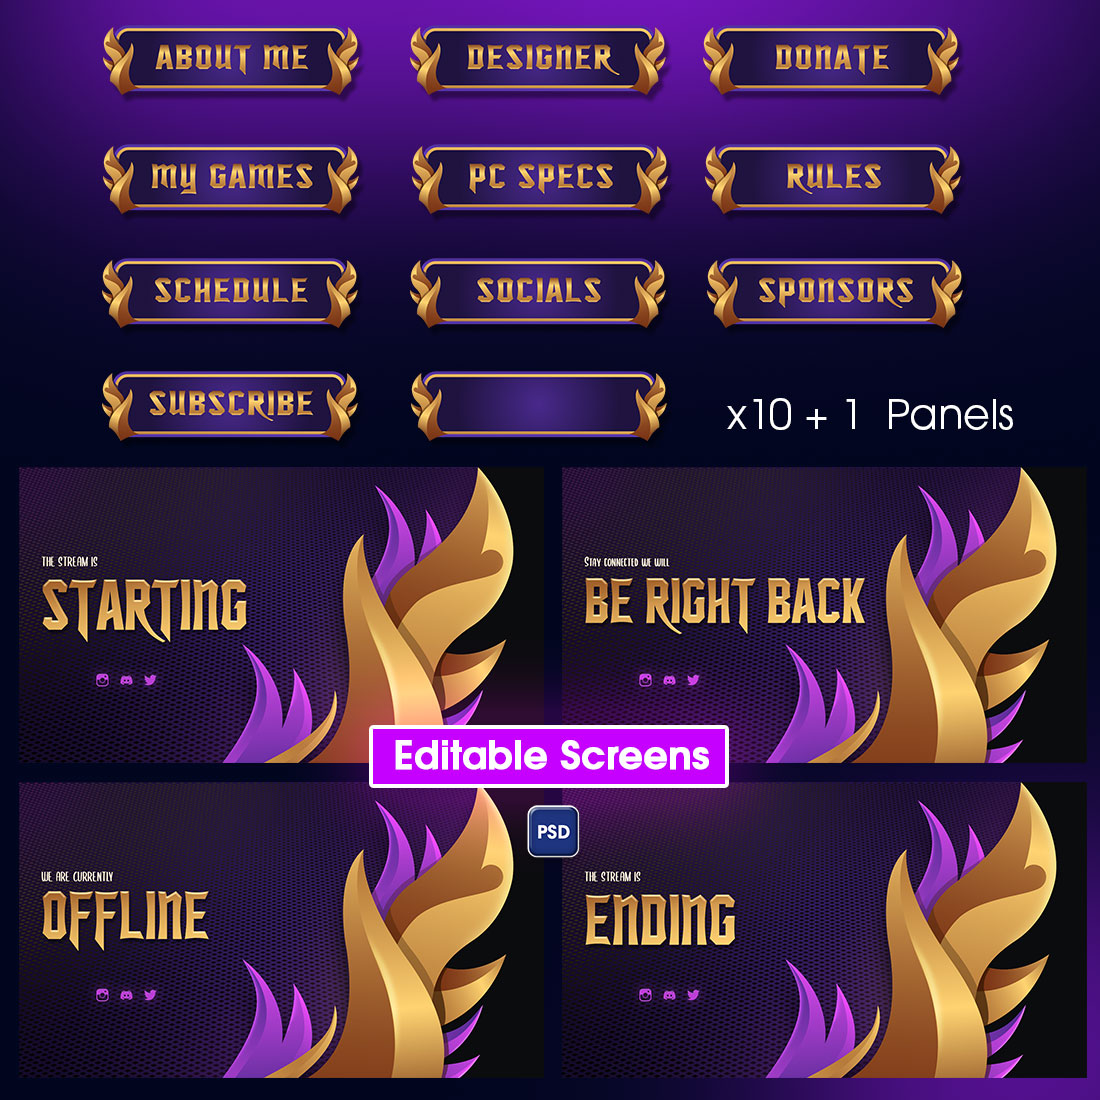 Royal fantasy Stream Overlay pack for Twitch and  in purple. -  MasterBundles